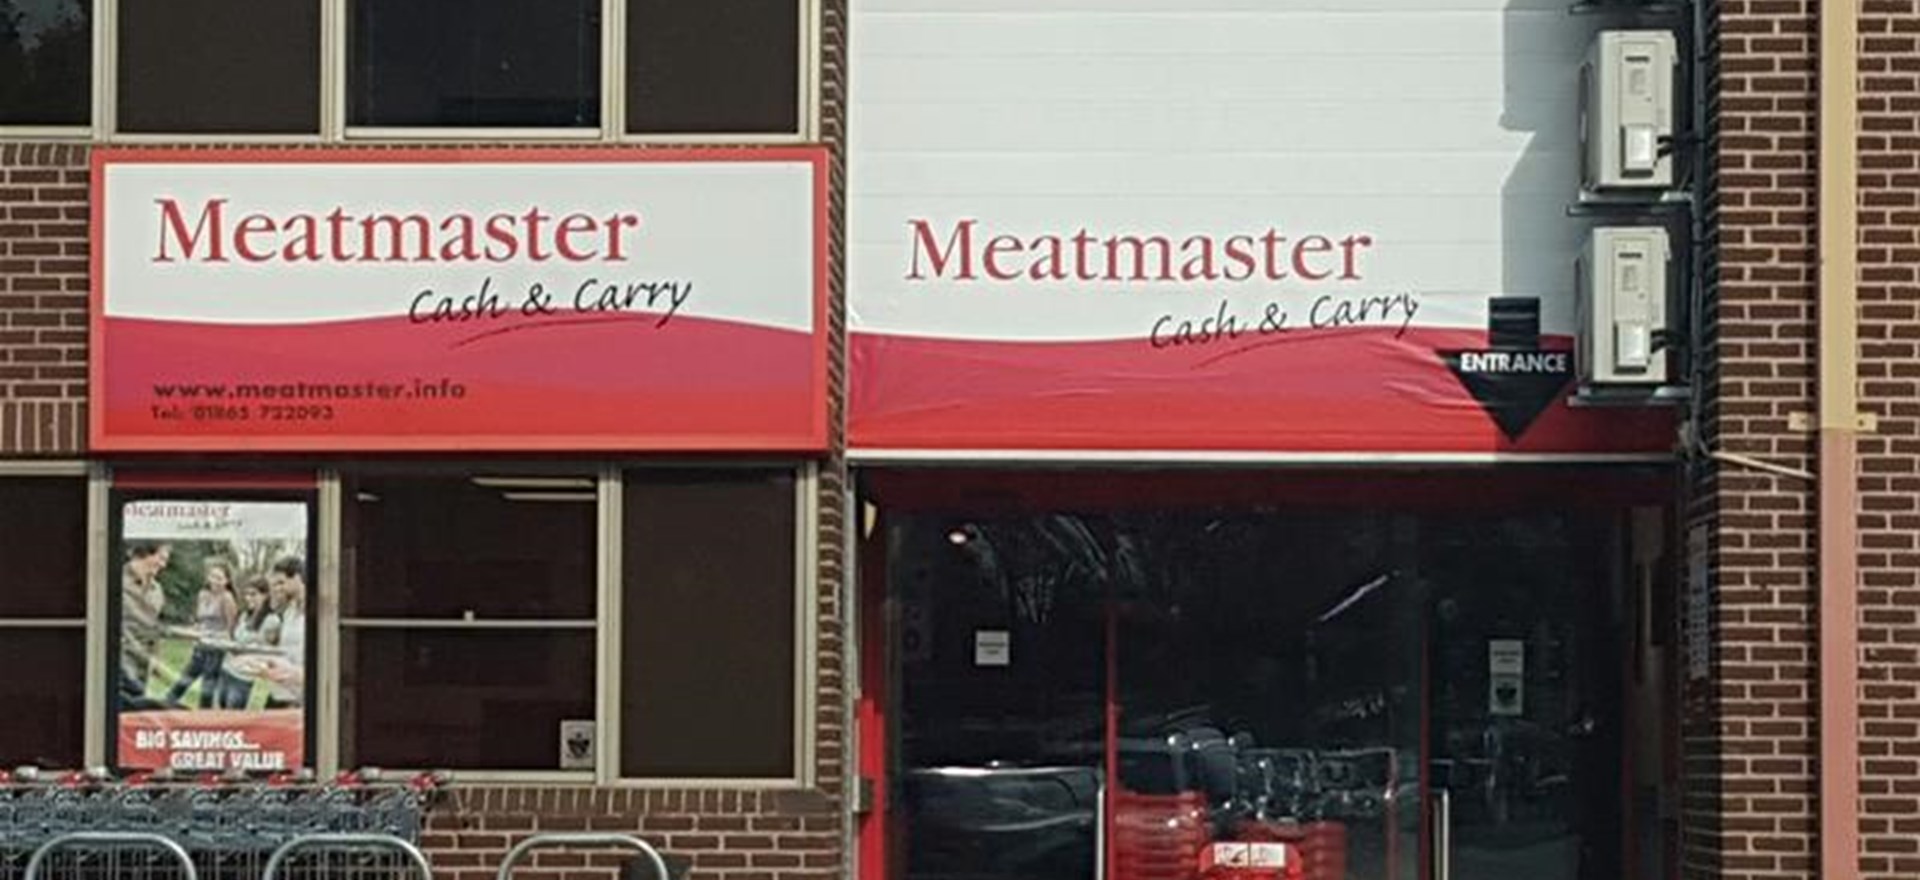 Meatmasters Exterior Shop Signage Oxford